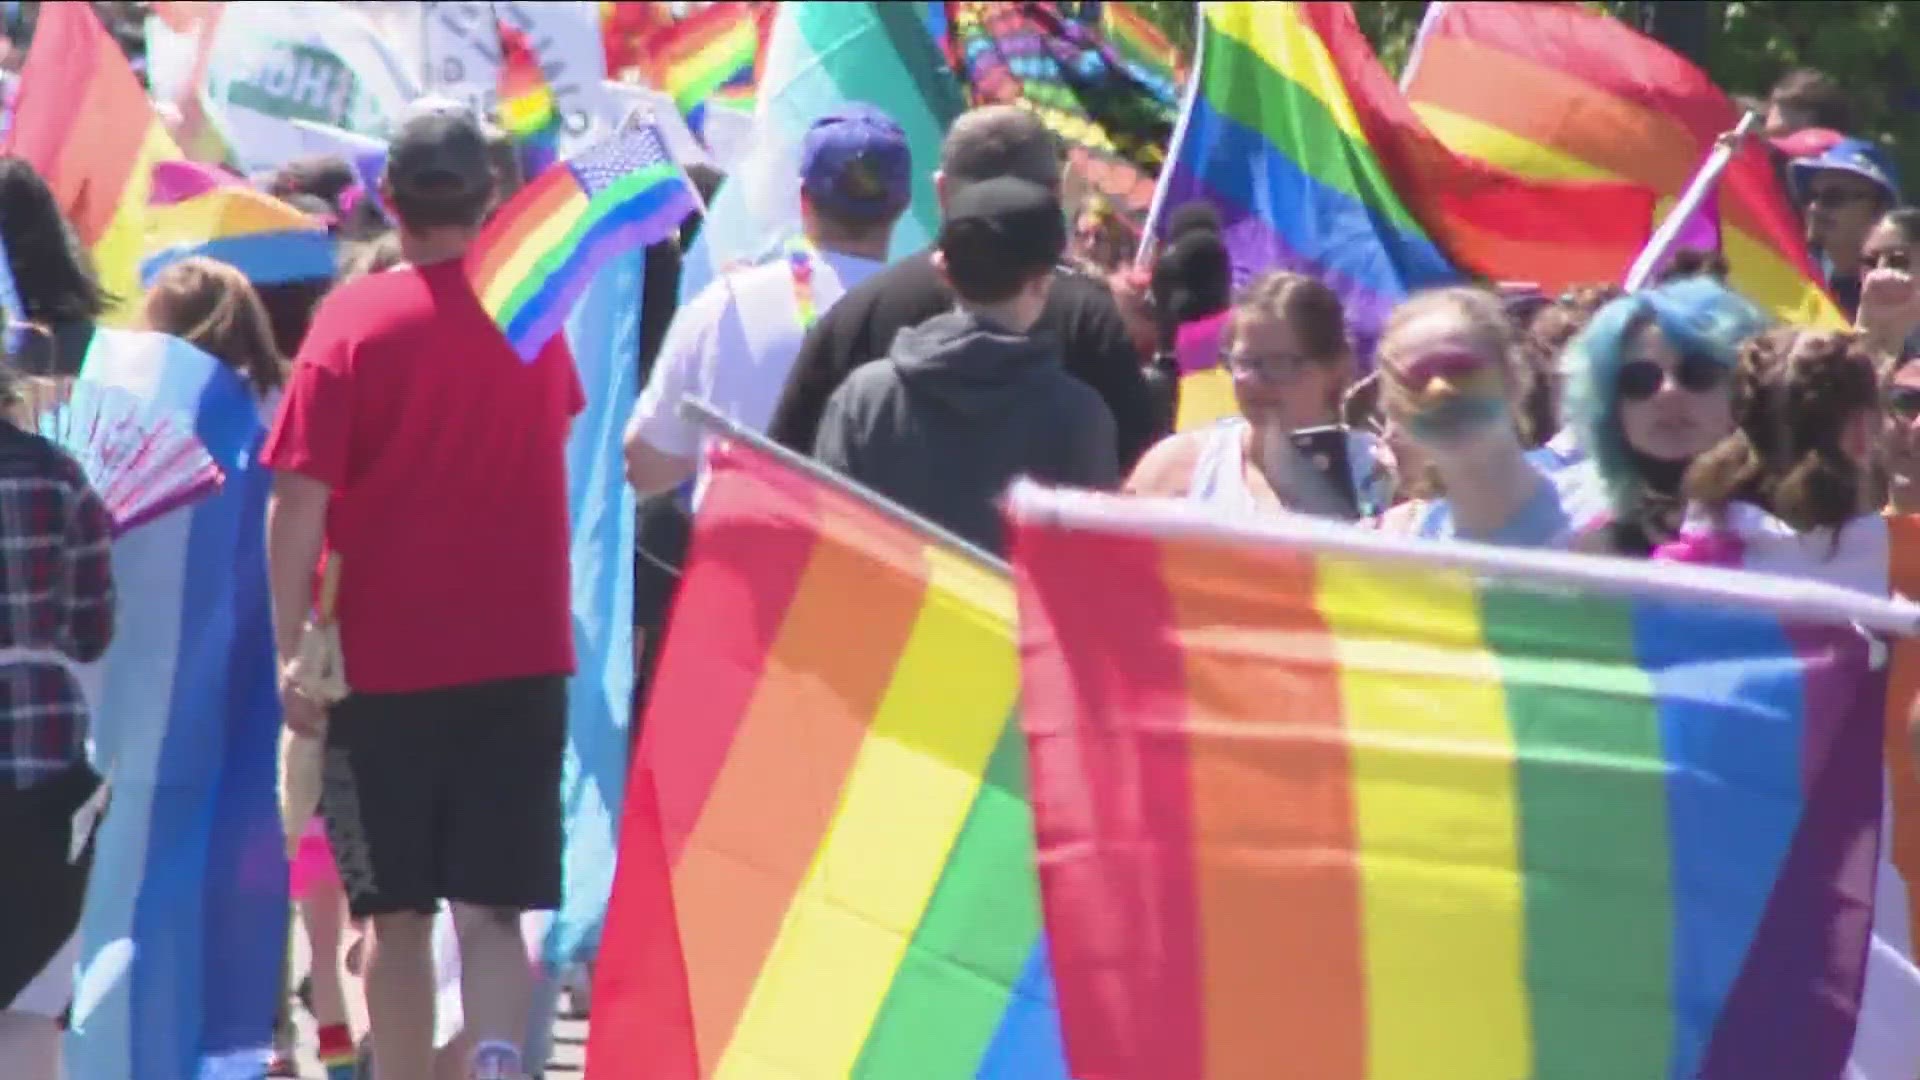 Organizers say the annual celebration will be held on Sunday, June 2. The Pride parade will begin at 11 a.m. at the corner of Elmwood and Forest avenues.